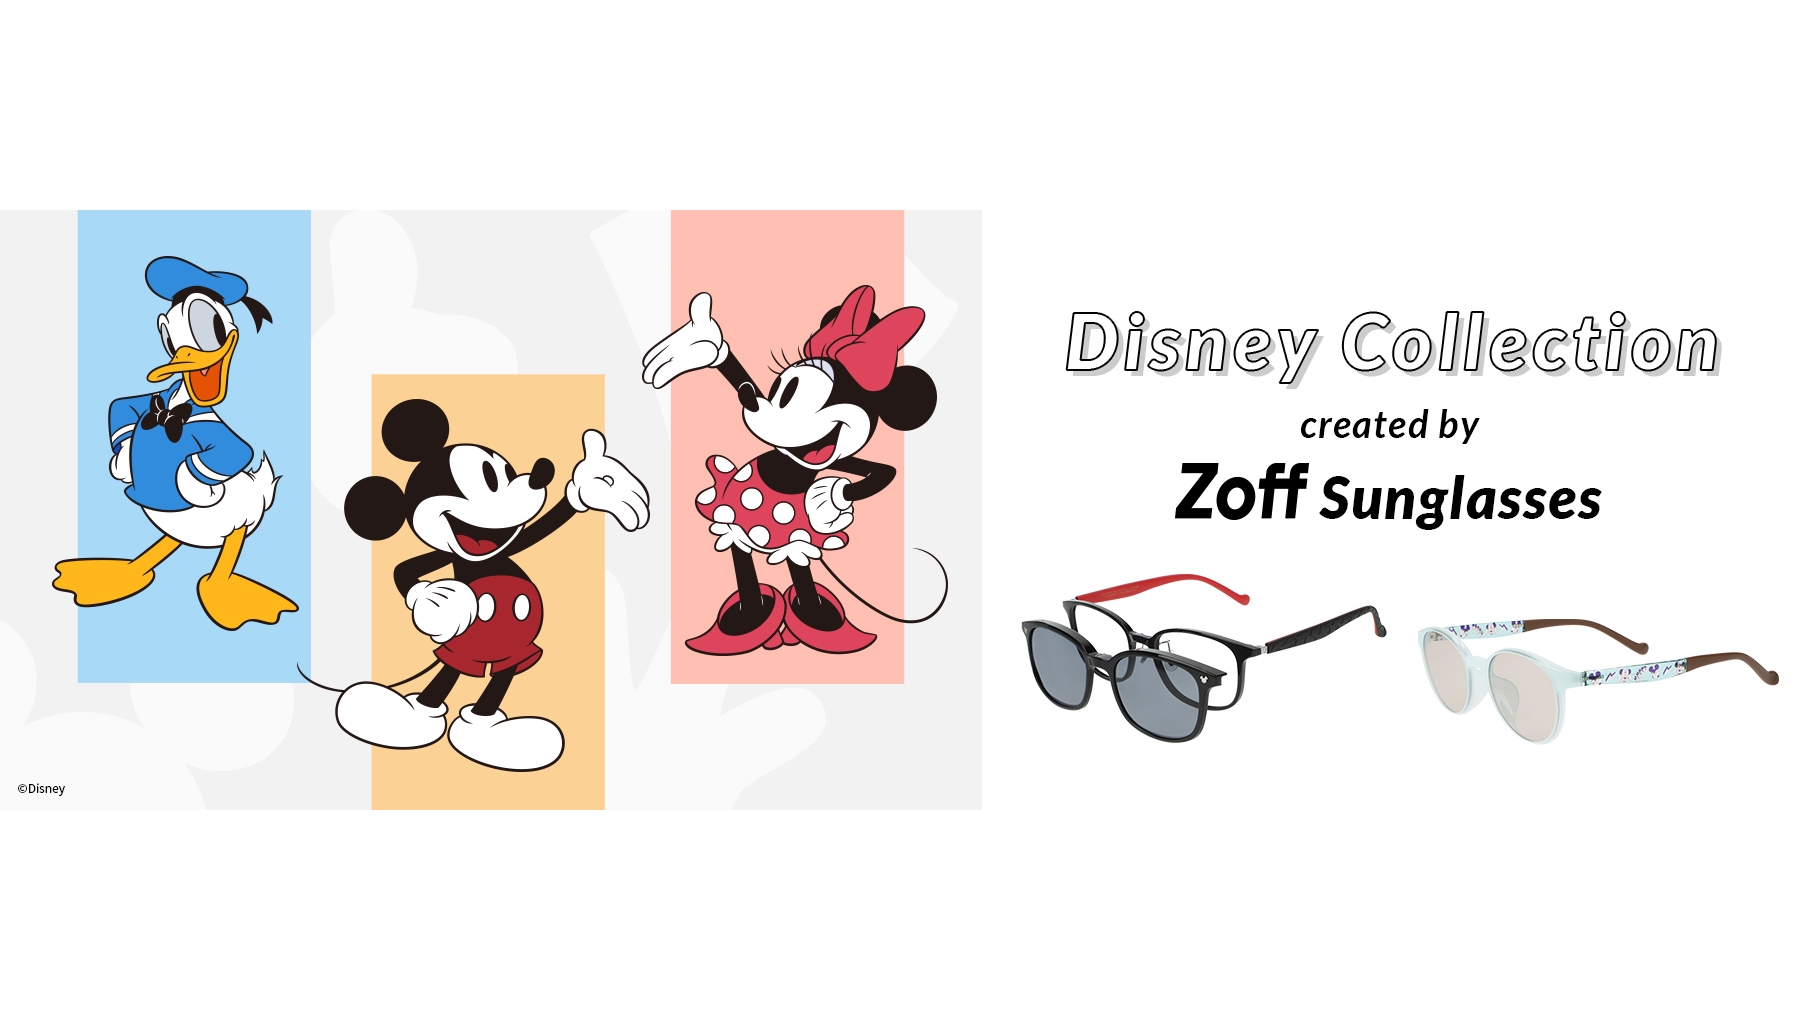 Disney Collection created by Zoff Sunglasses1